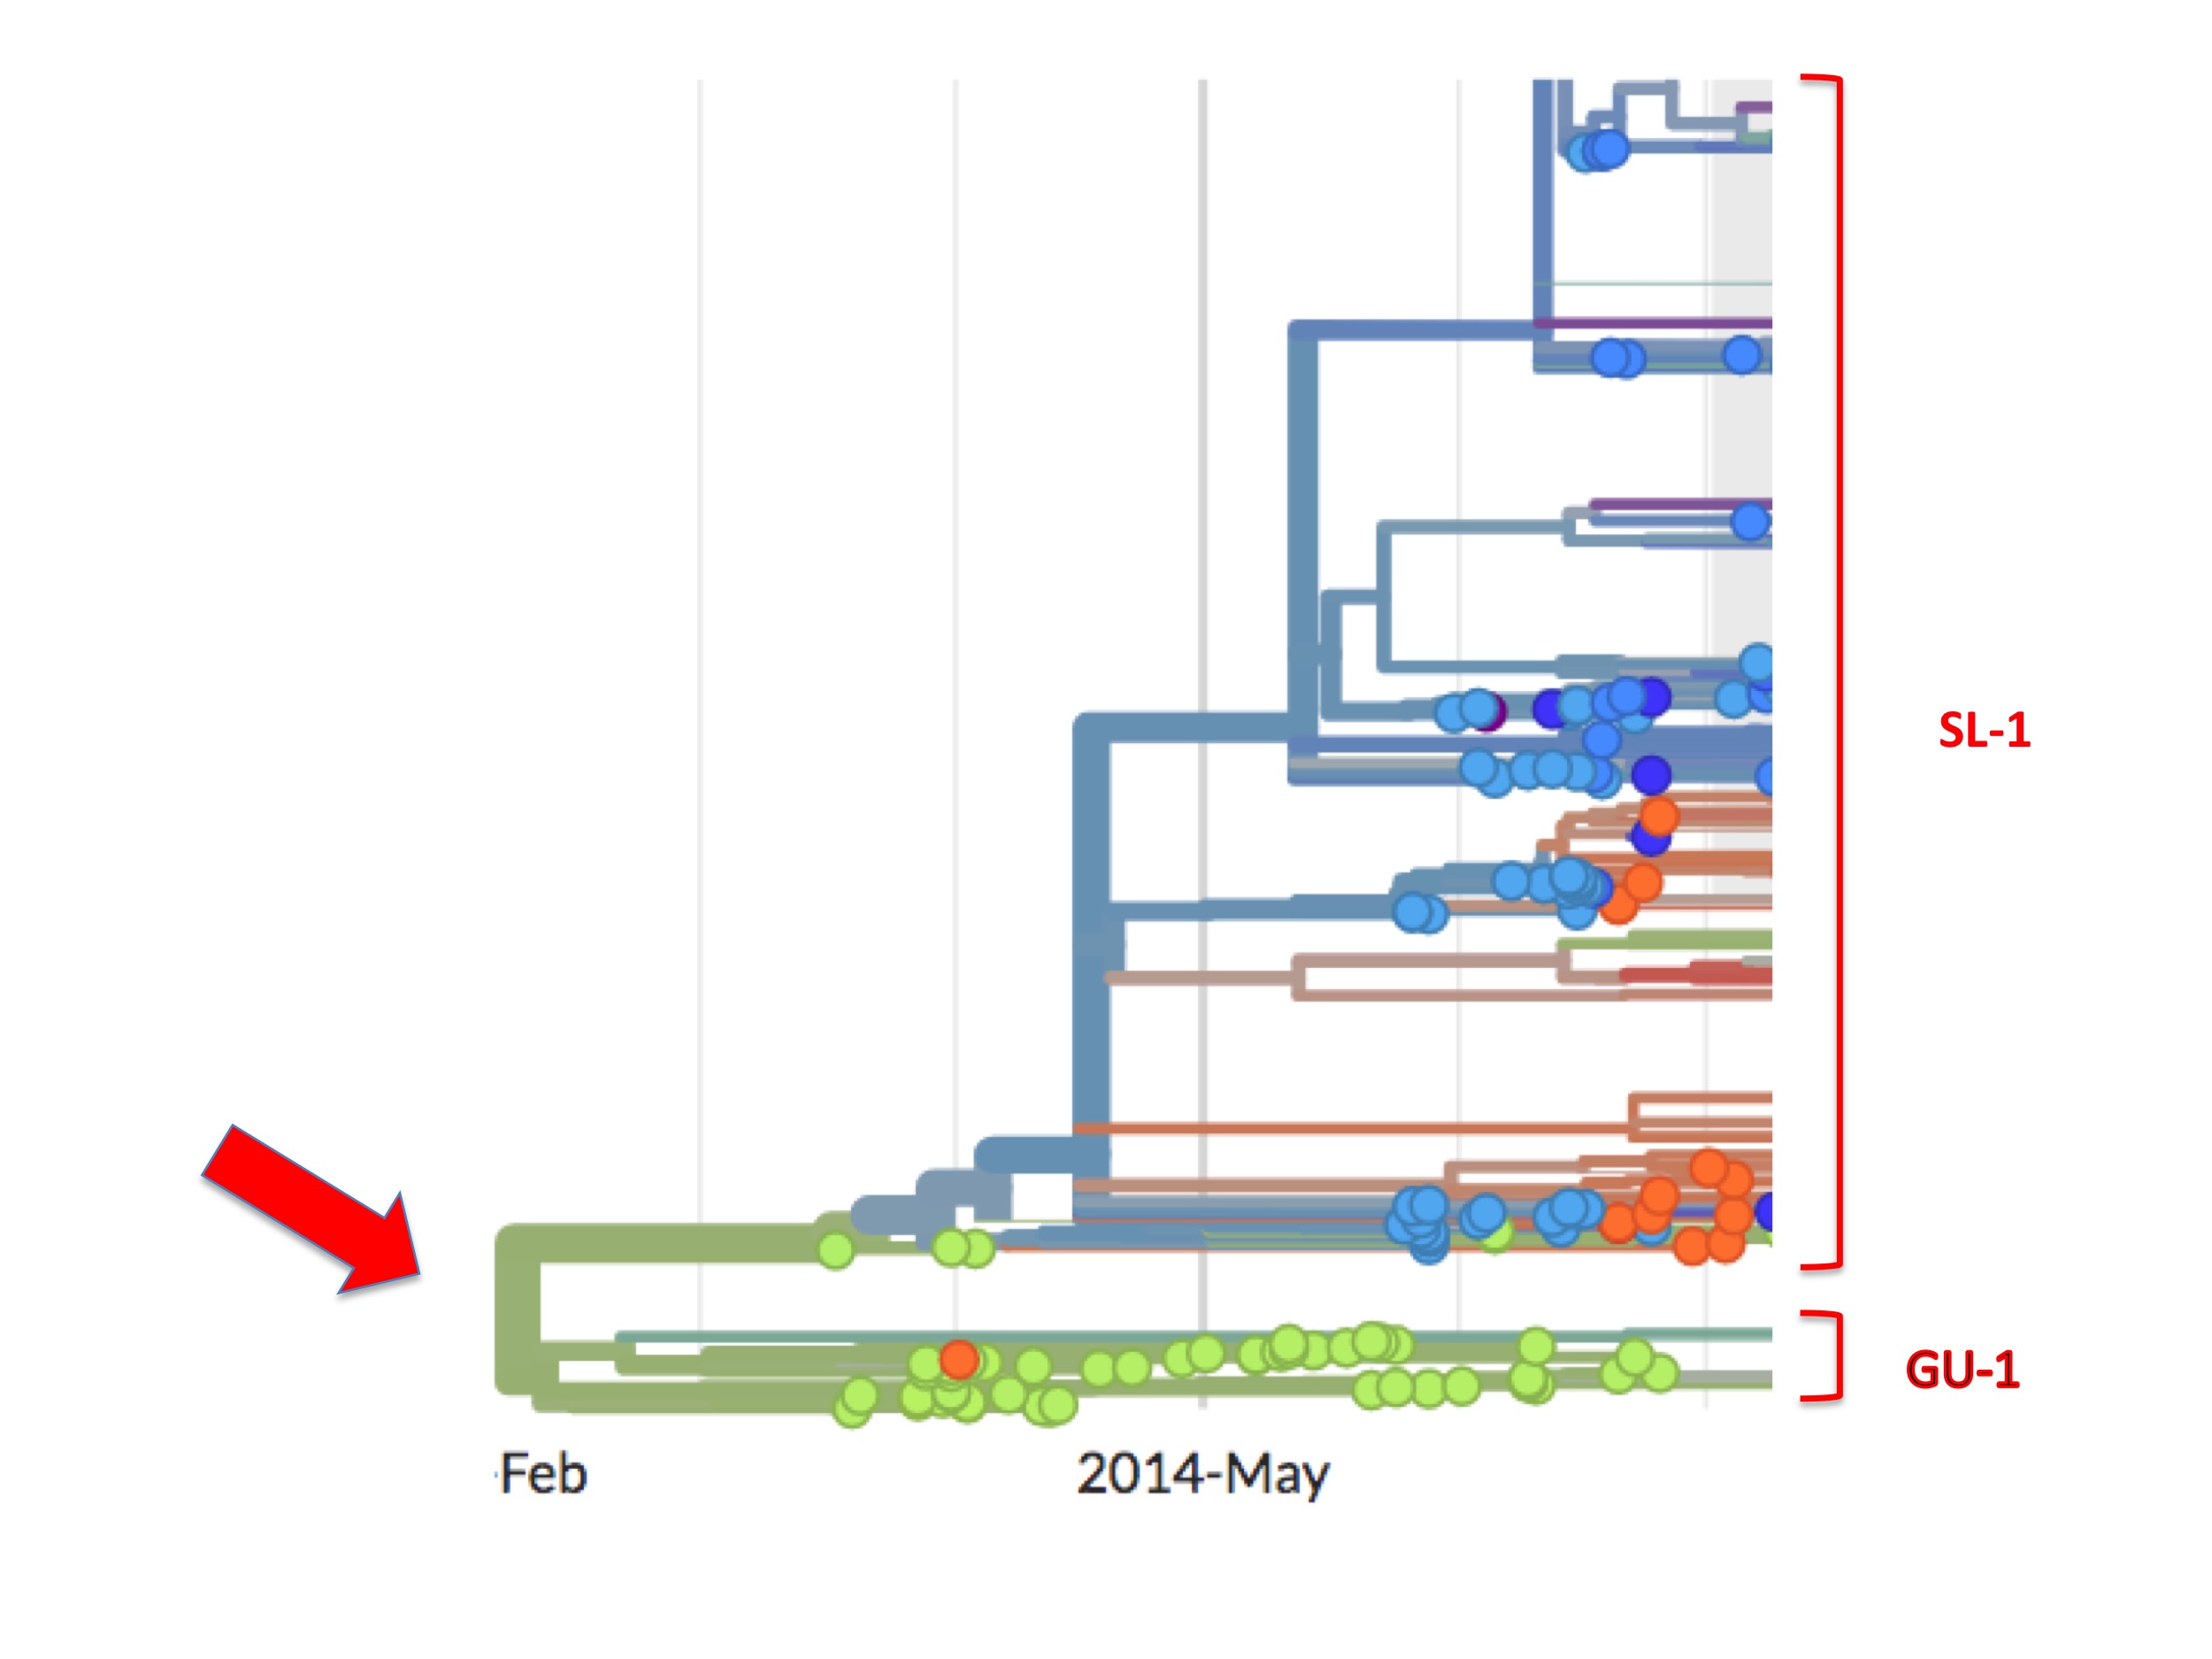 Close-up of the origin from Nextstrain's Ebola page. The putative origin is indicated by the red arrow